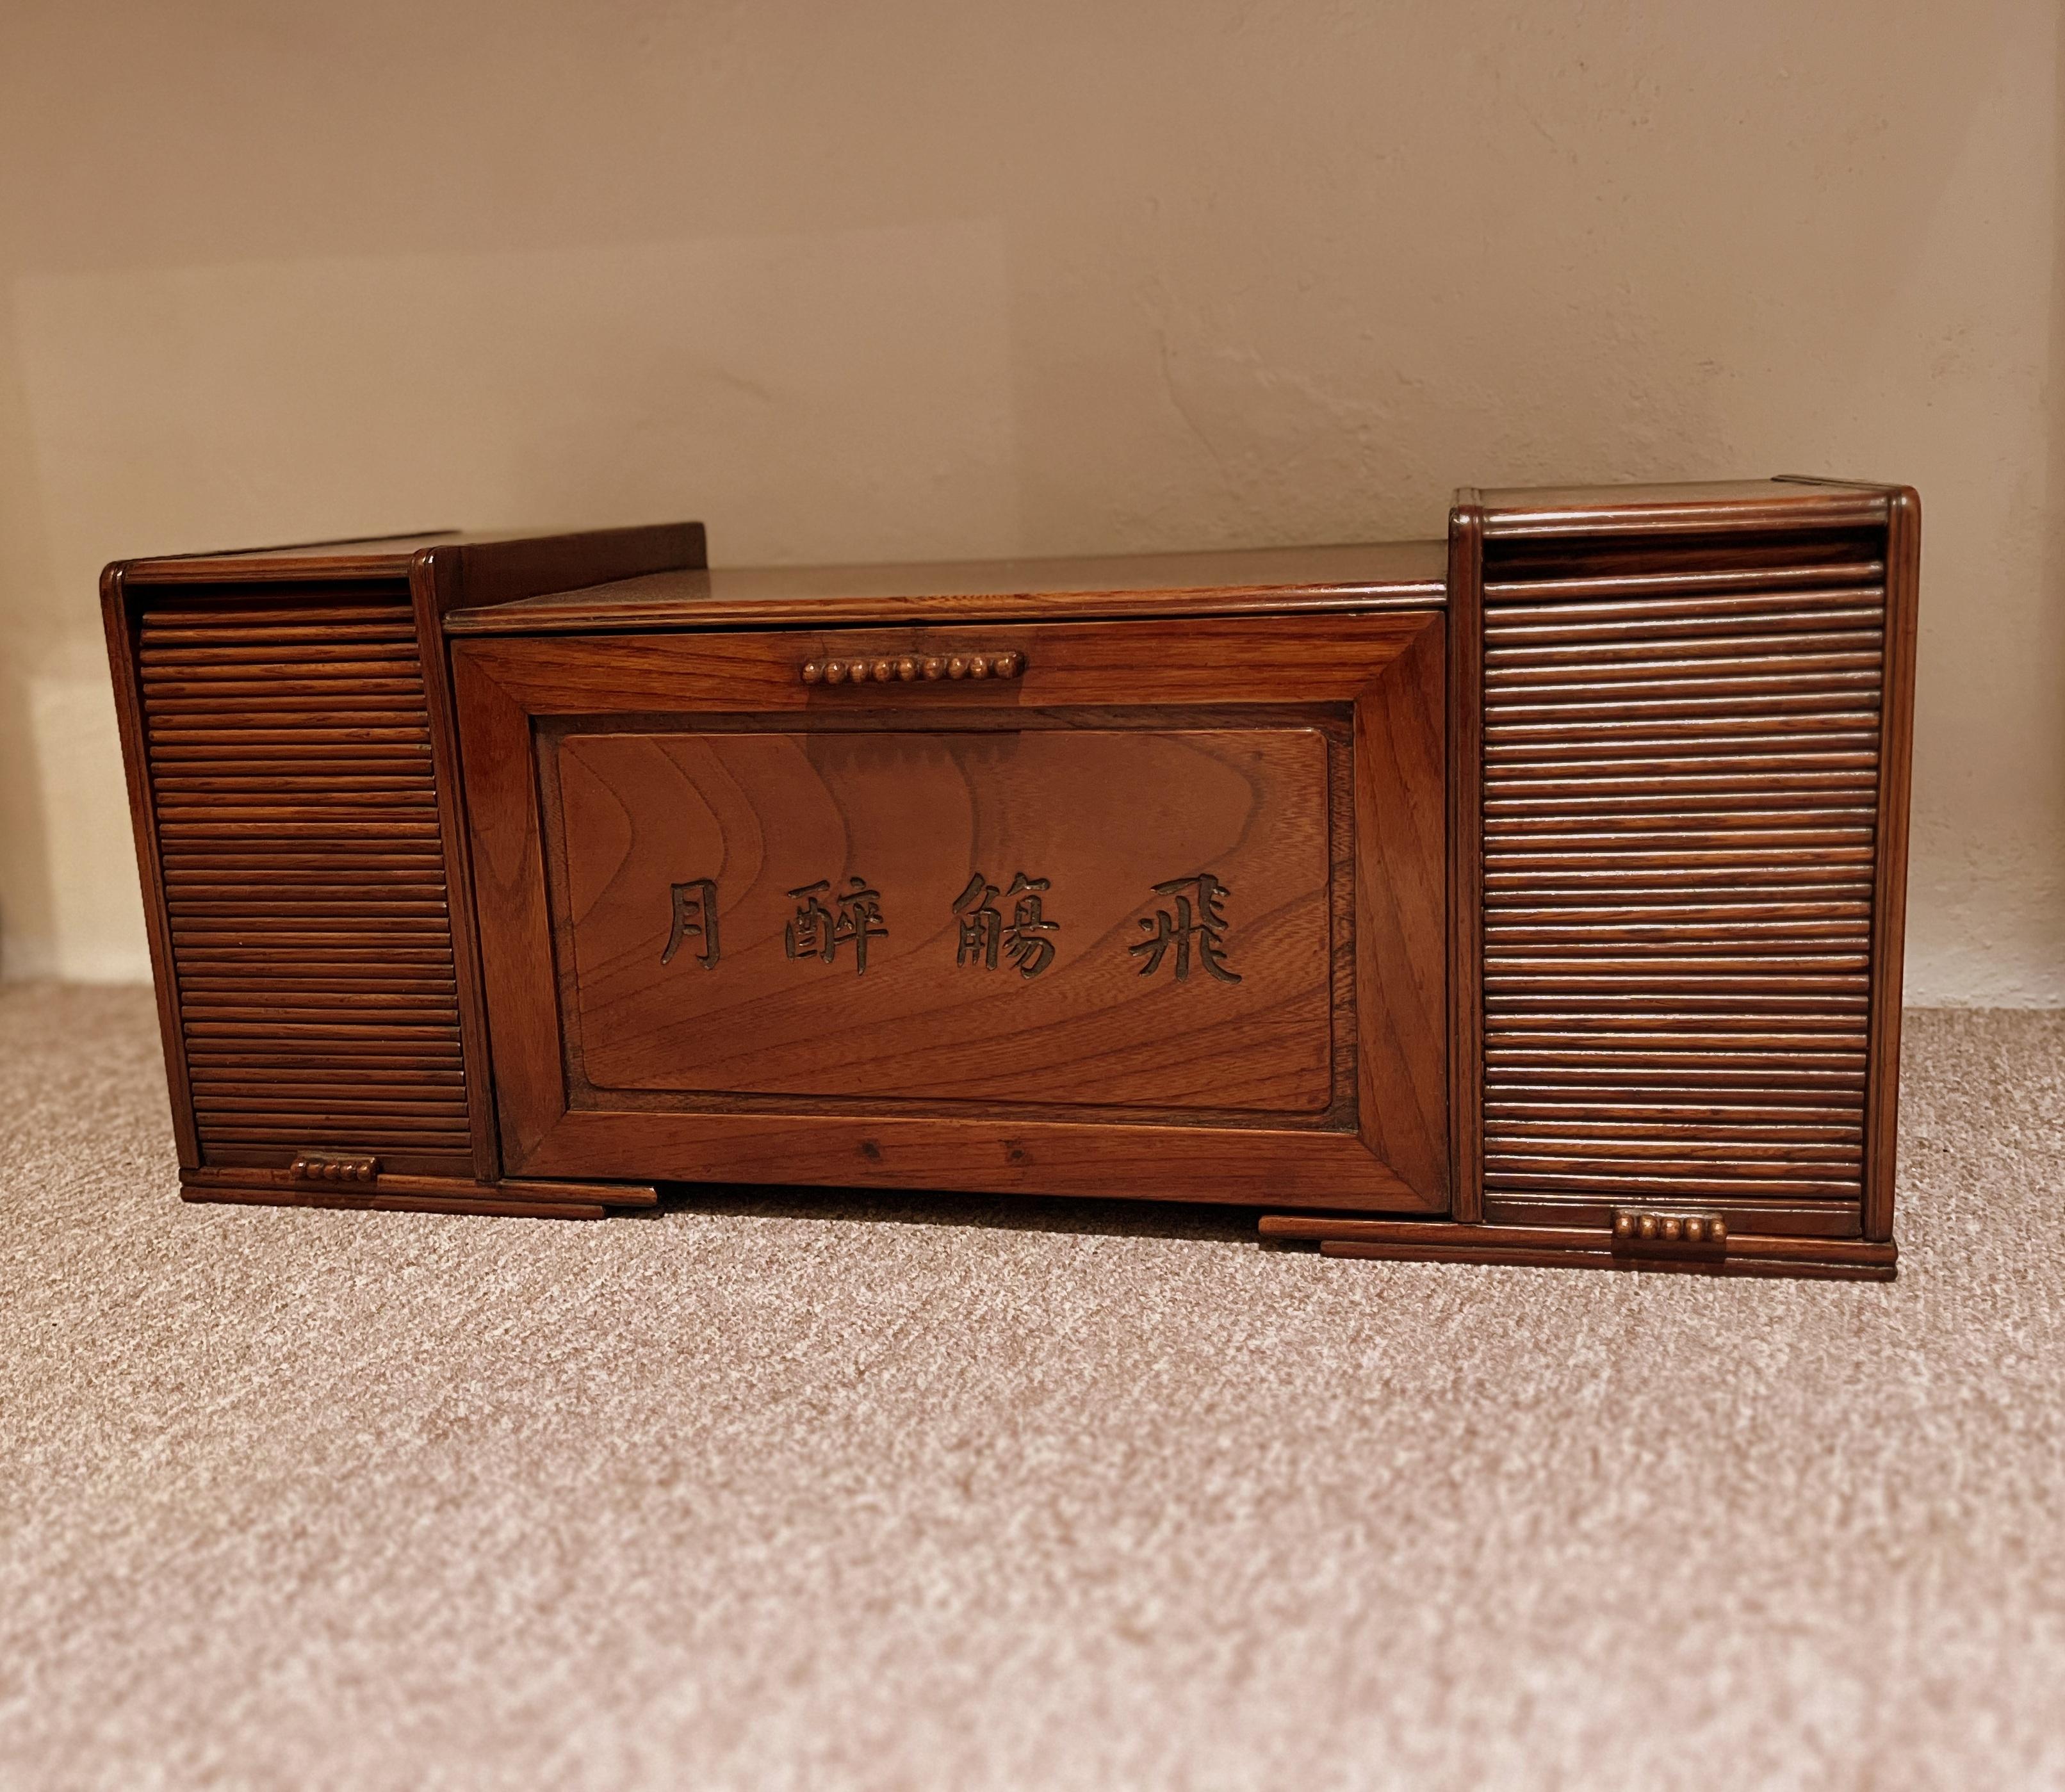 Asian elmwood small desk top cabinet for storage scholar's objects, ink stone, brushes etc